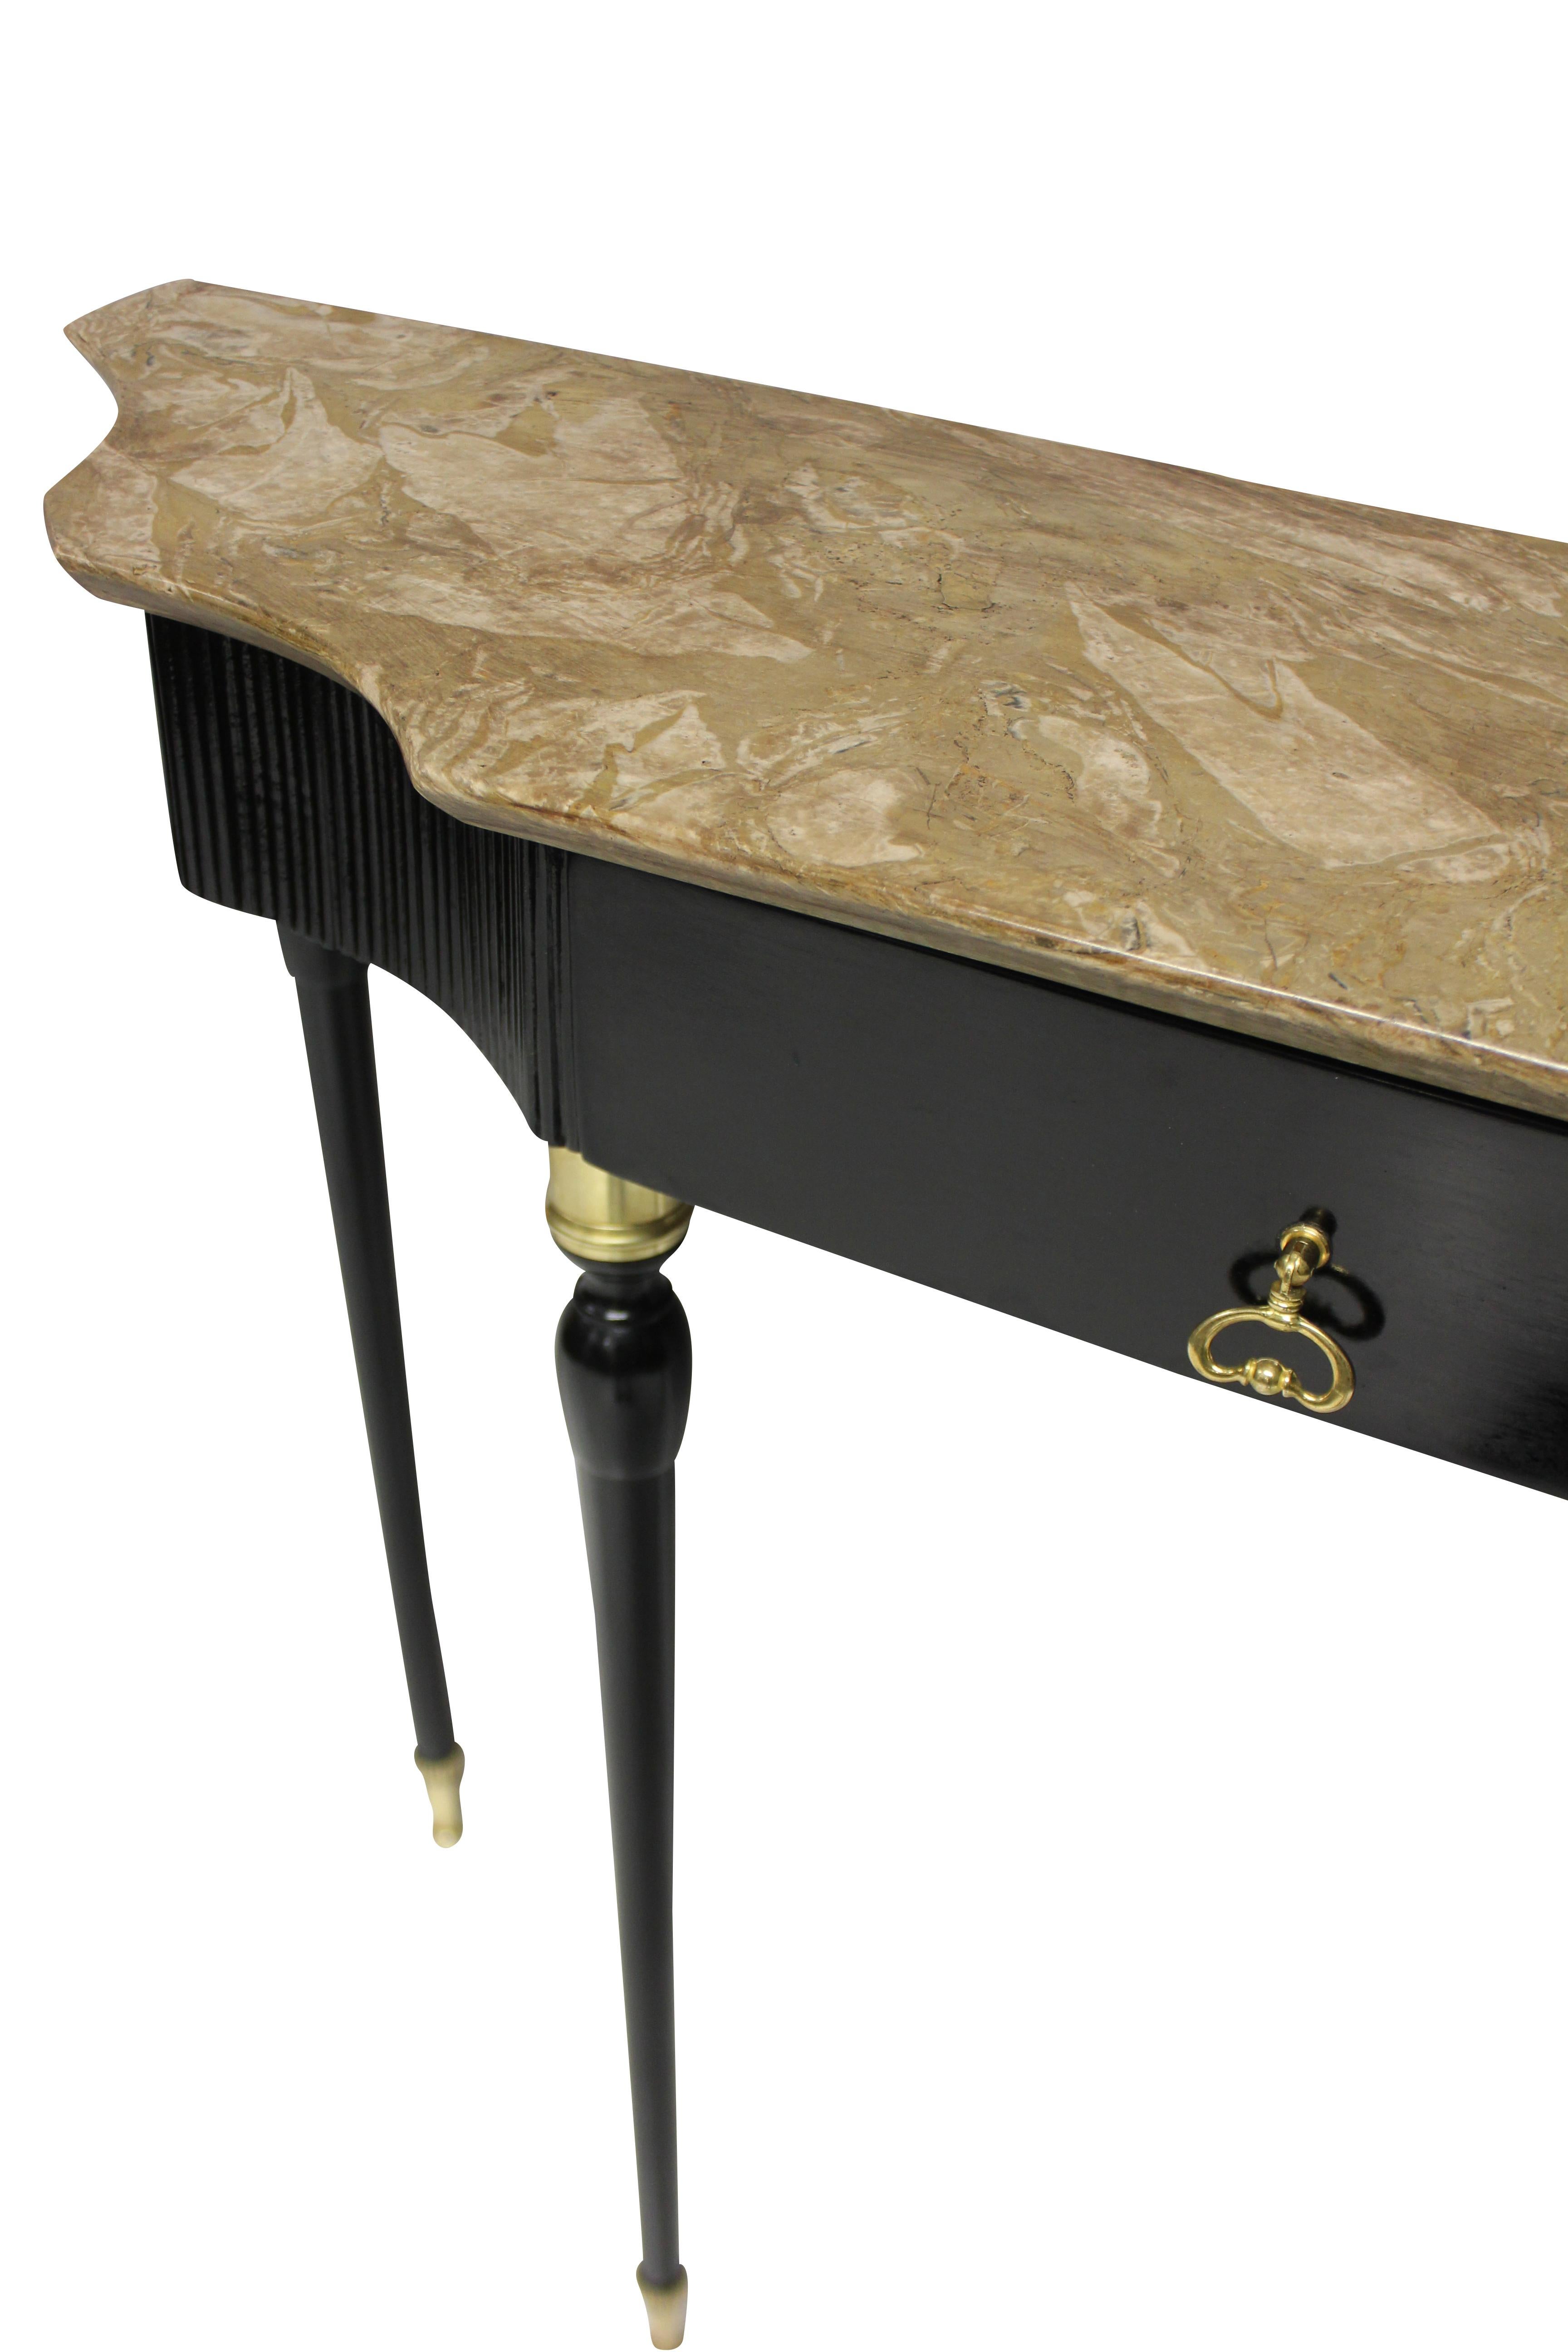 A stylish Italian midcentury ebonized console table, with brass sabot feet and decoration. The ribbed frieze with a single drawer and a shaped faun fossil marble top.